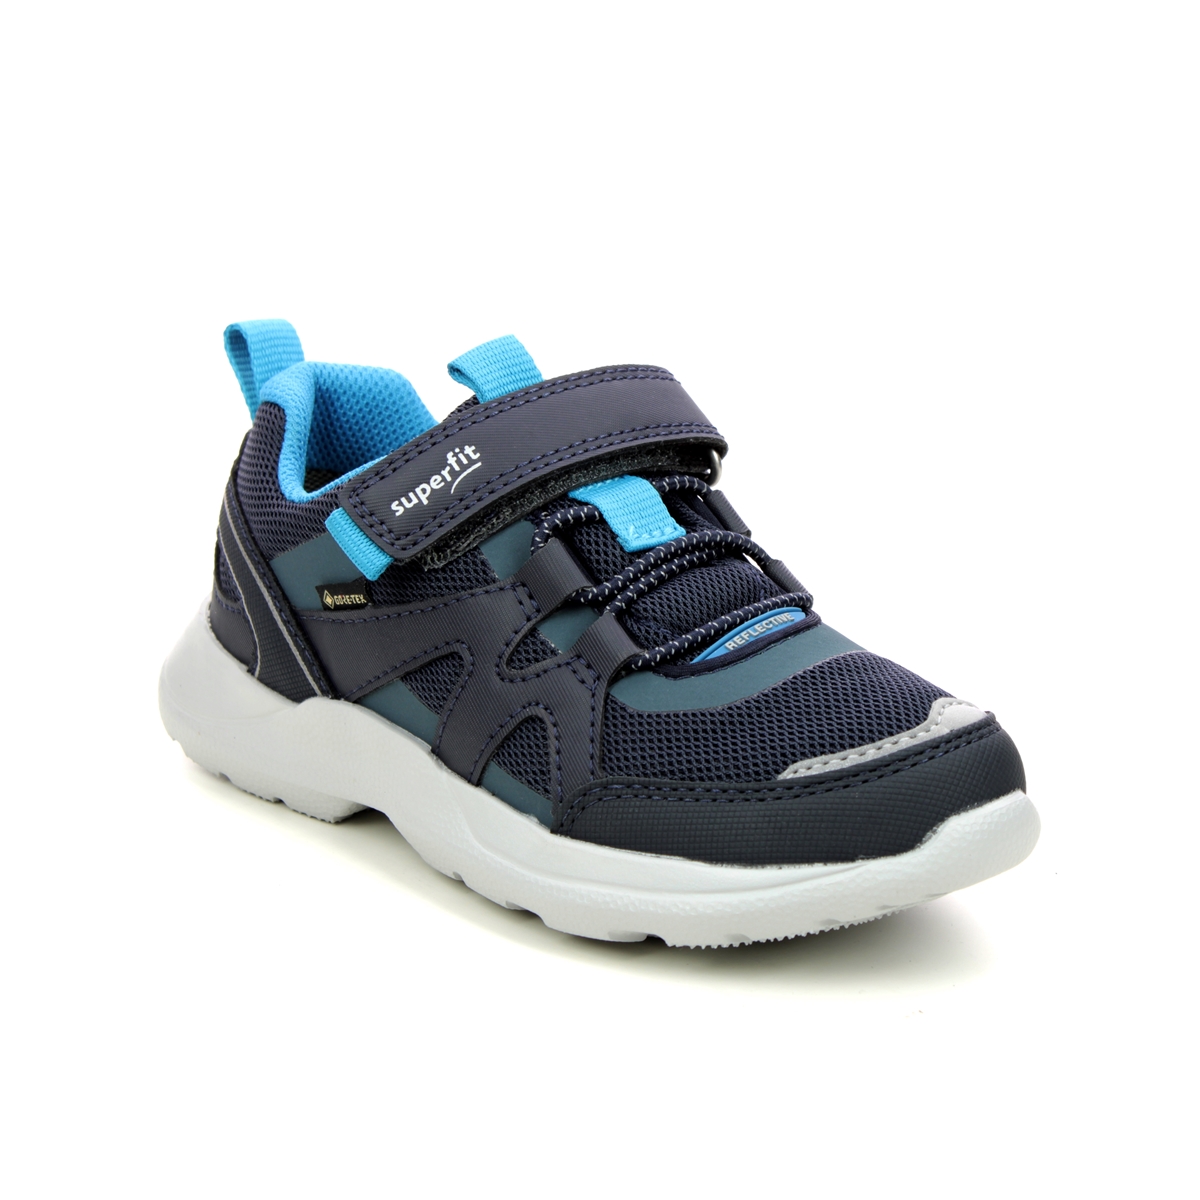 Superfit Rush Jnr B Gtx Navy Kids trainers 1006219-8030 in a Plain Man-made in Size 30